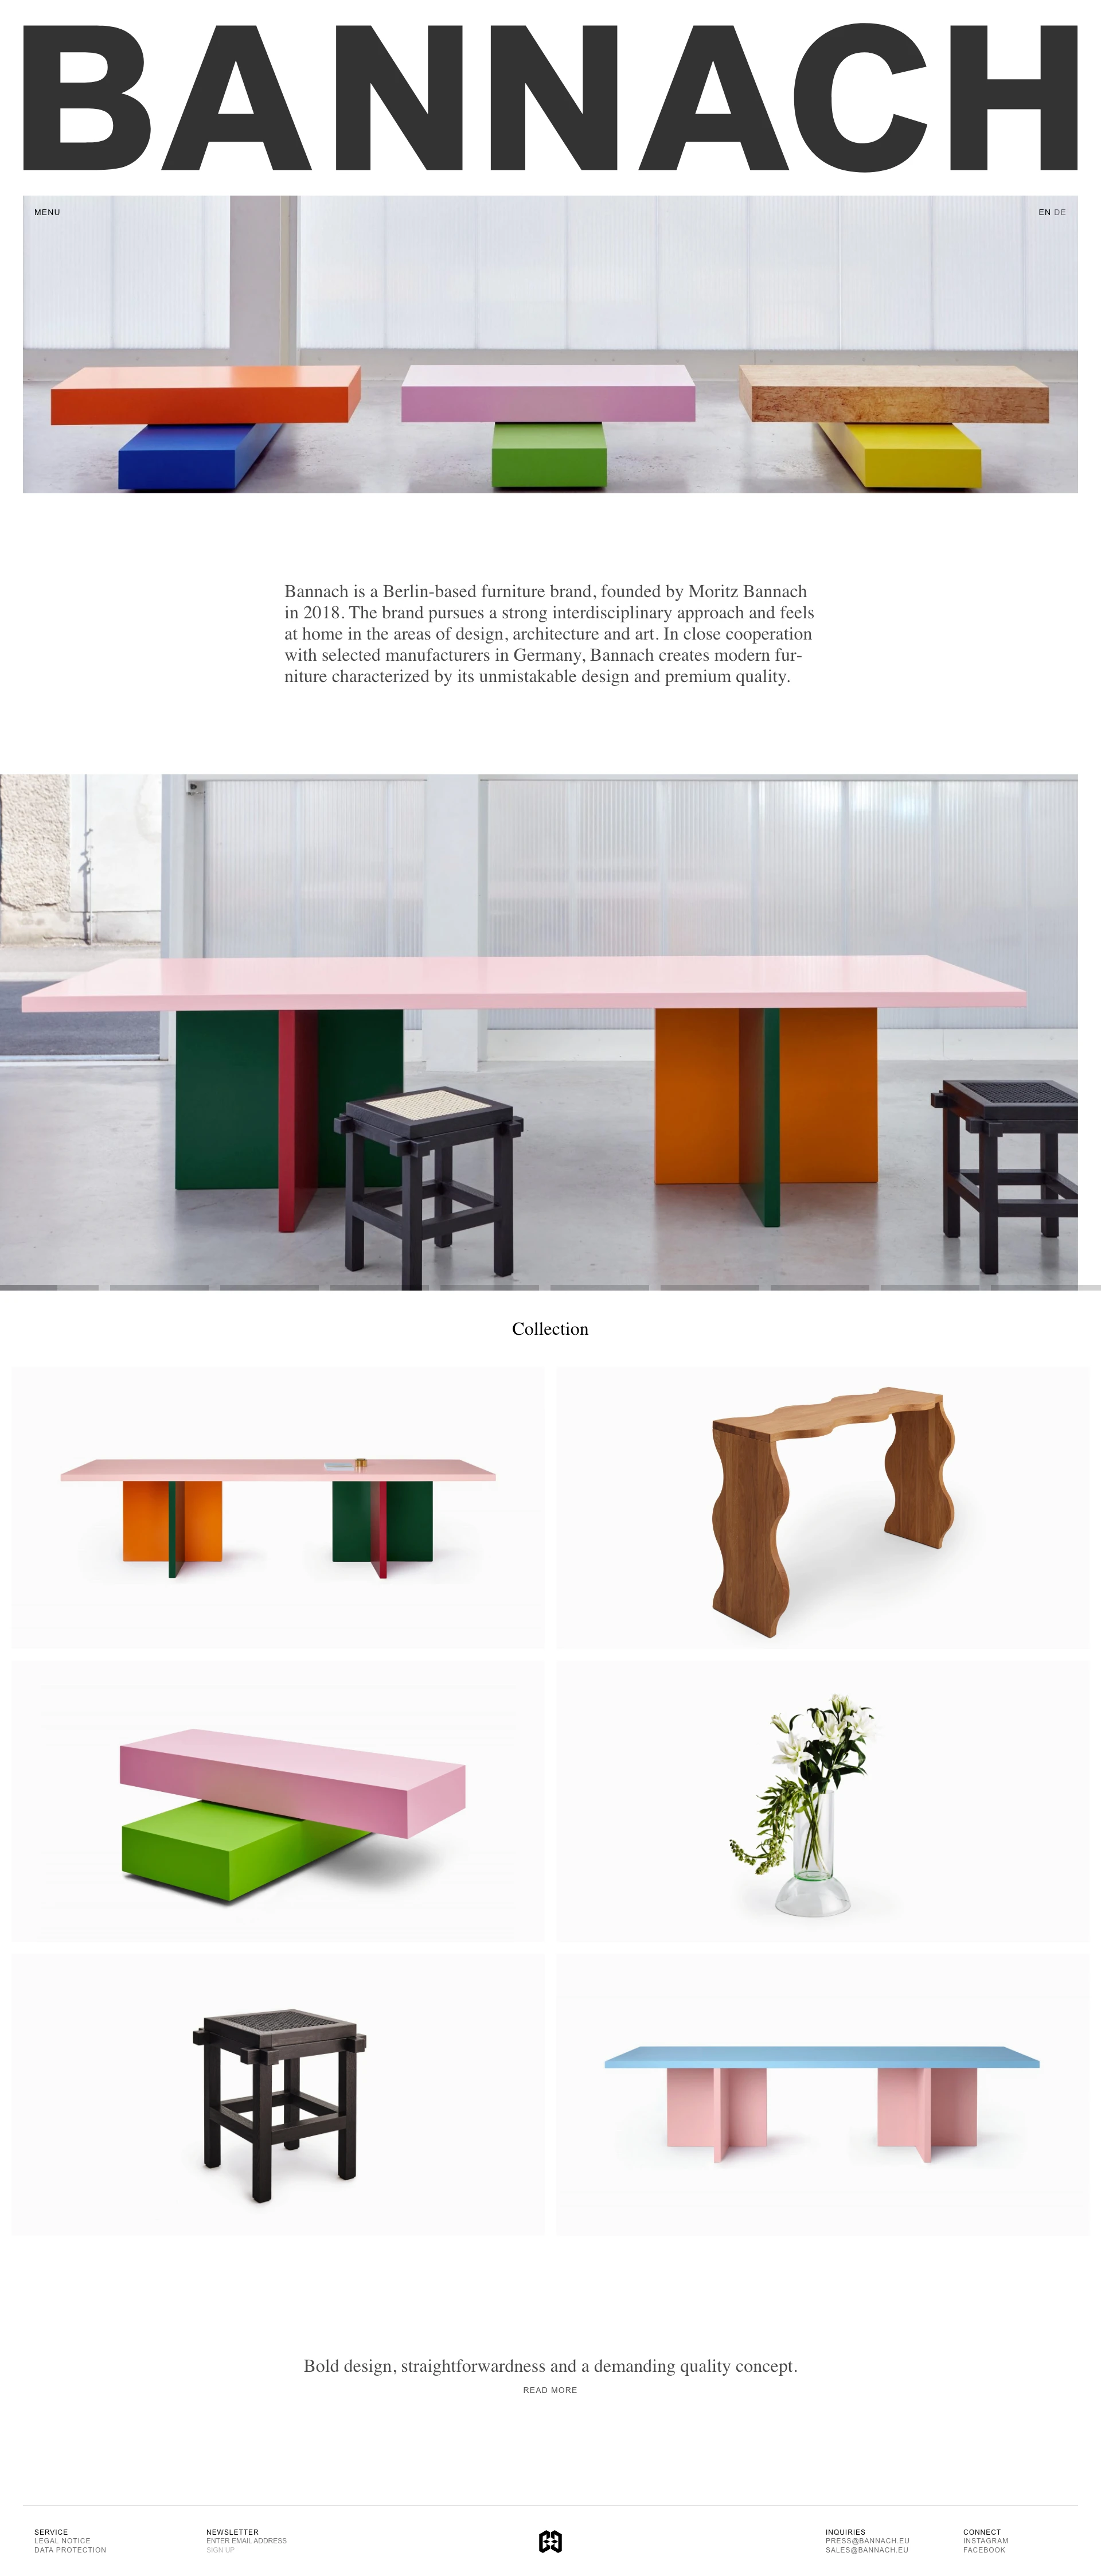 Bannach Landing Page Example: Bannach is a Berlin-based furniture brand, founded by Moritz Bannach in 2018. The brand pursues a strong interdisciplinary approach and feels at home in the areas of design, architecture and art. In close cooperation with selected manufacturers in Germany, Bannach creates modern furniture characterized by its unmistakable design and premium quality.